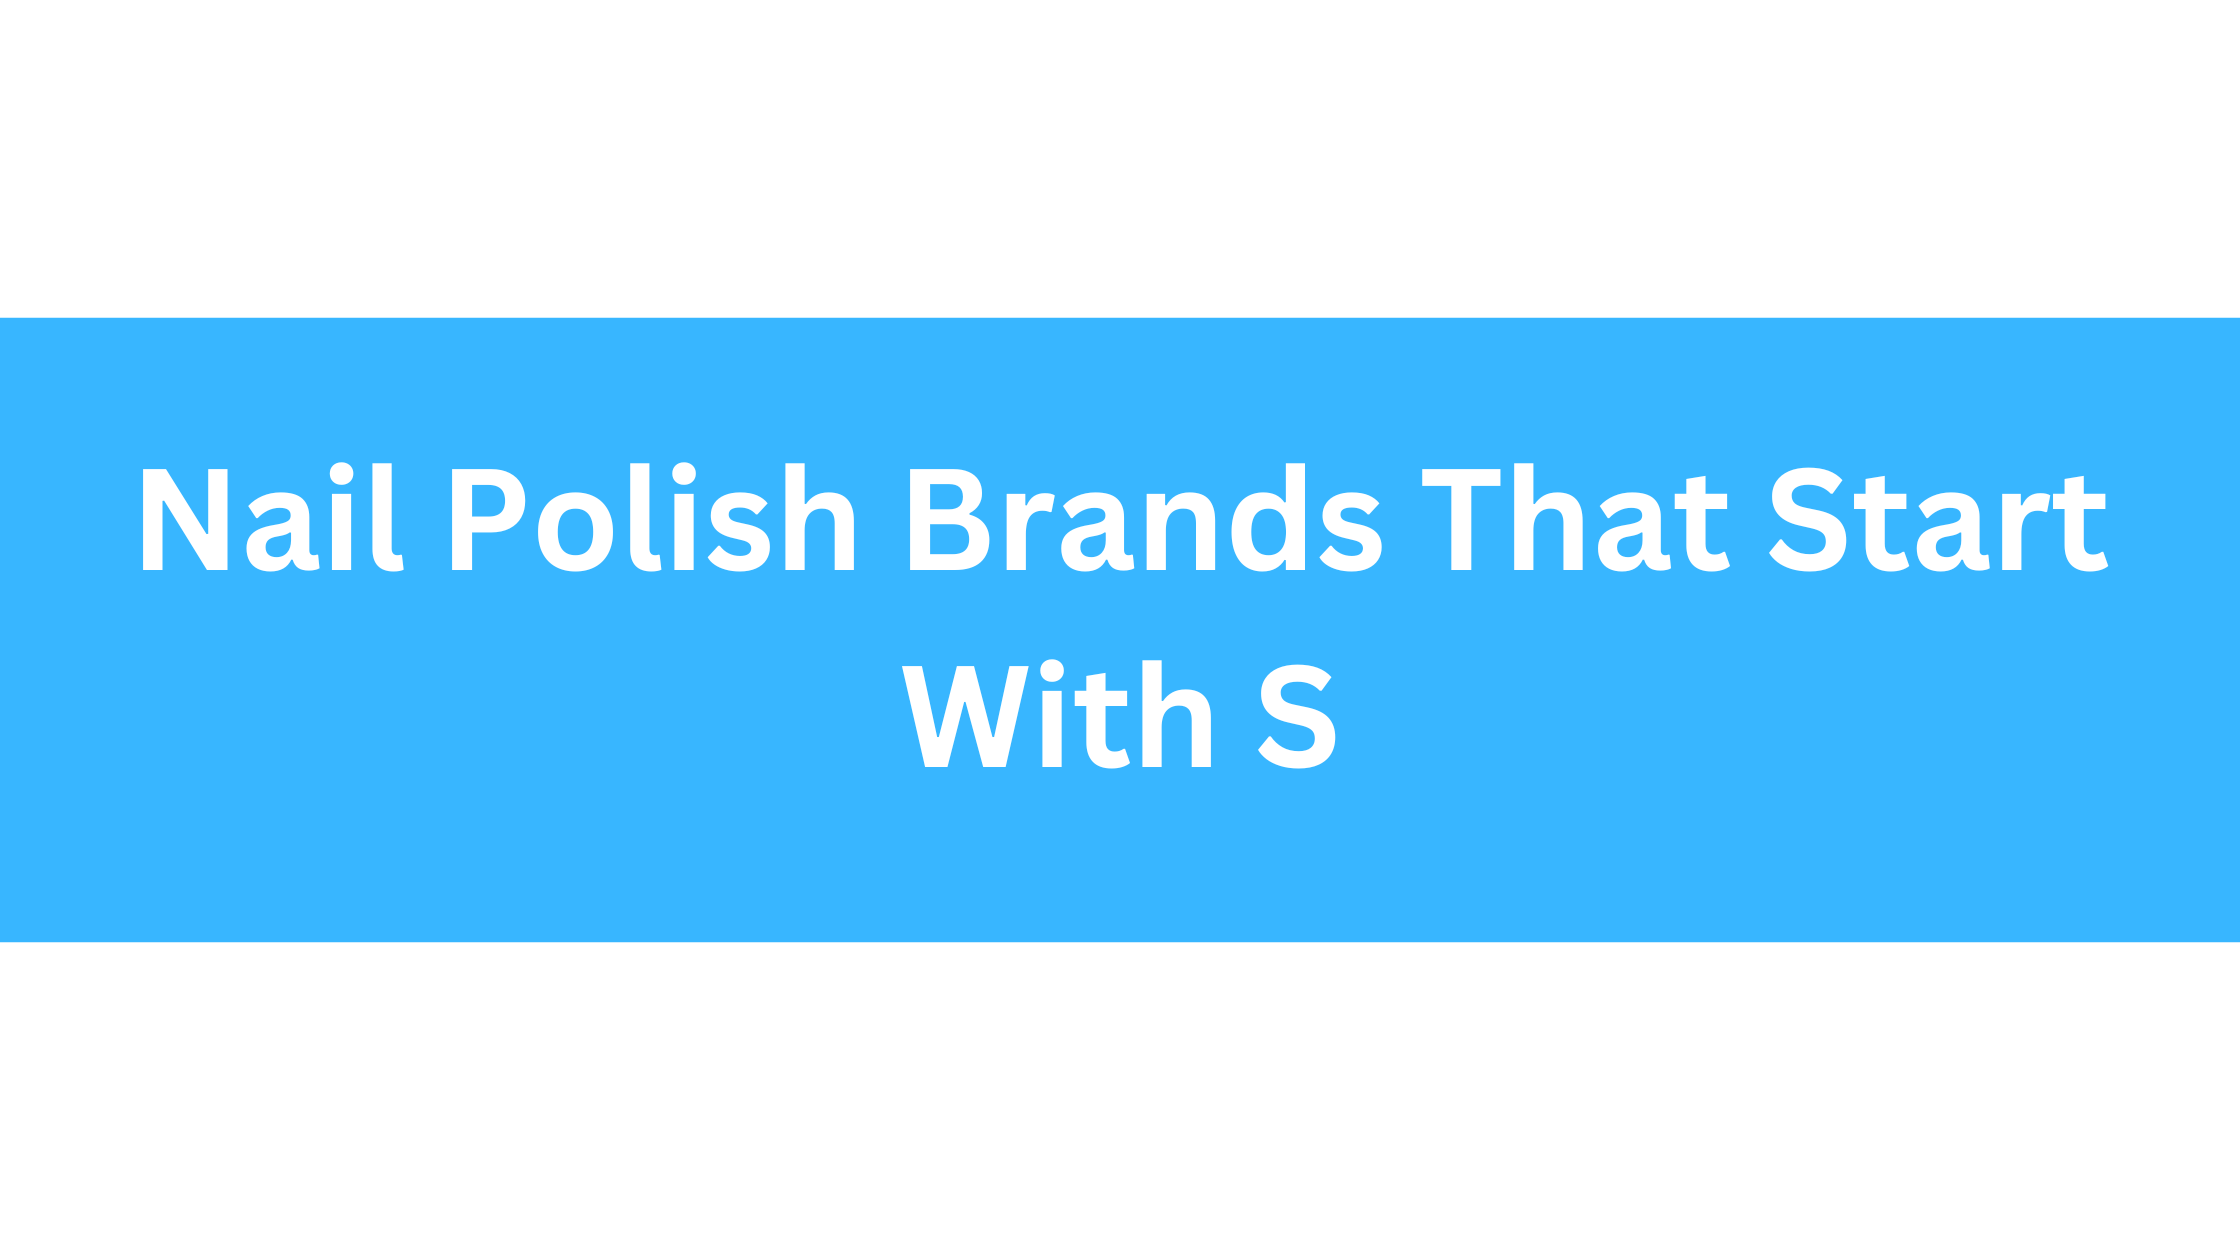 Nail Polish Brands That Start With S